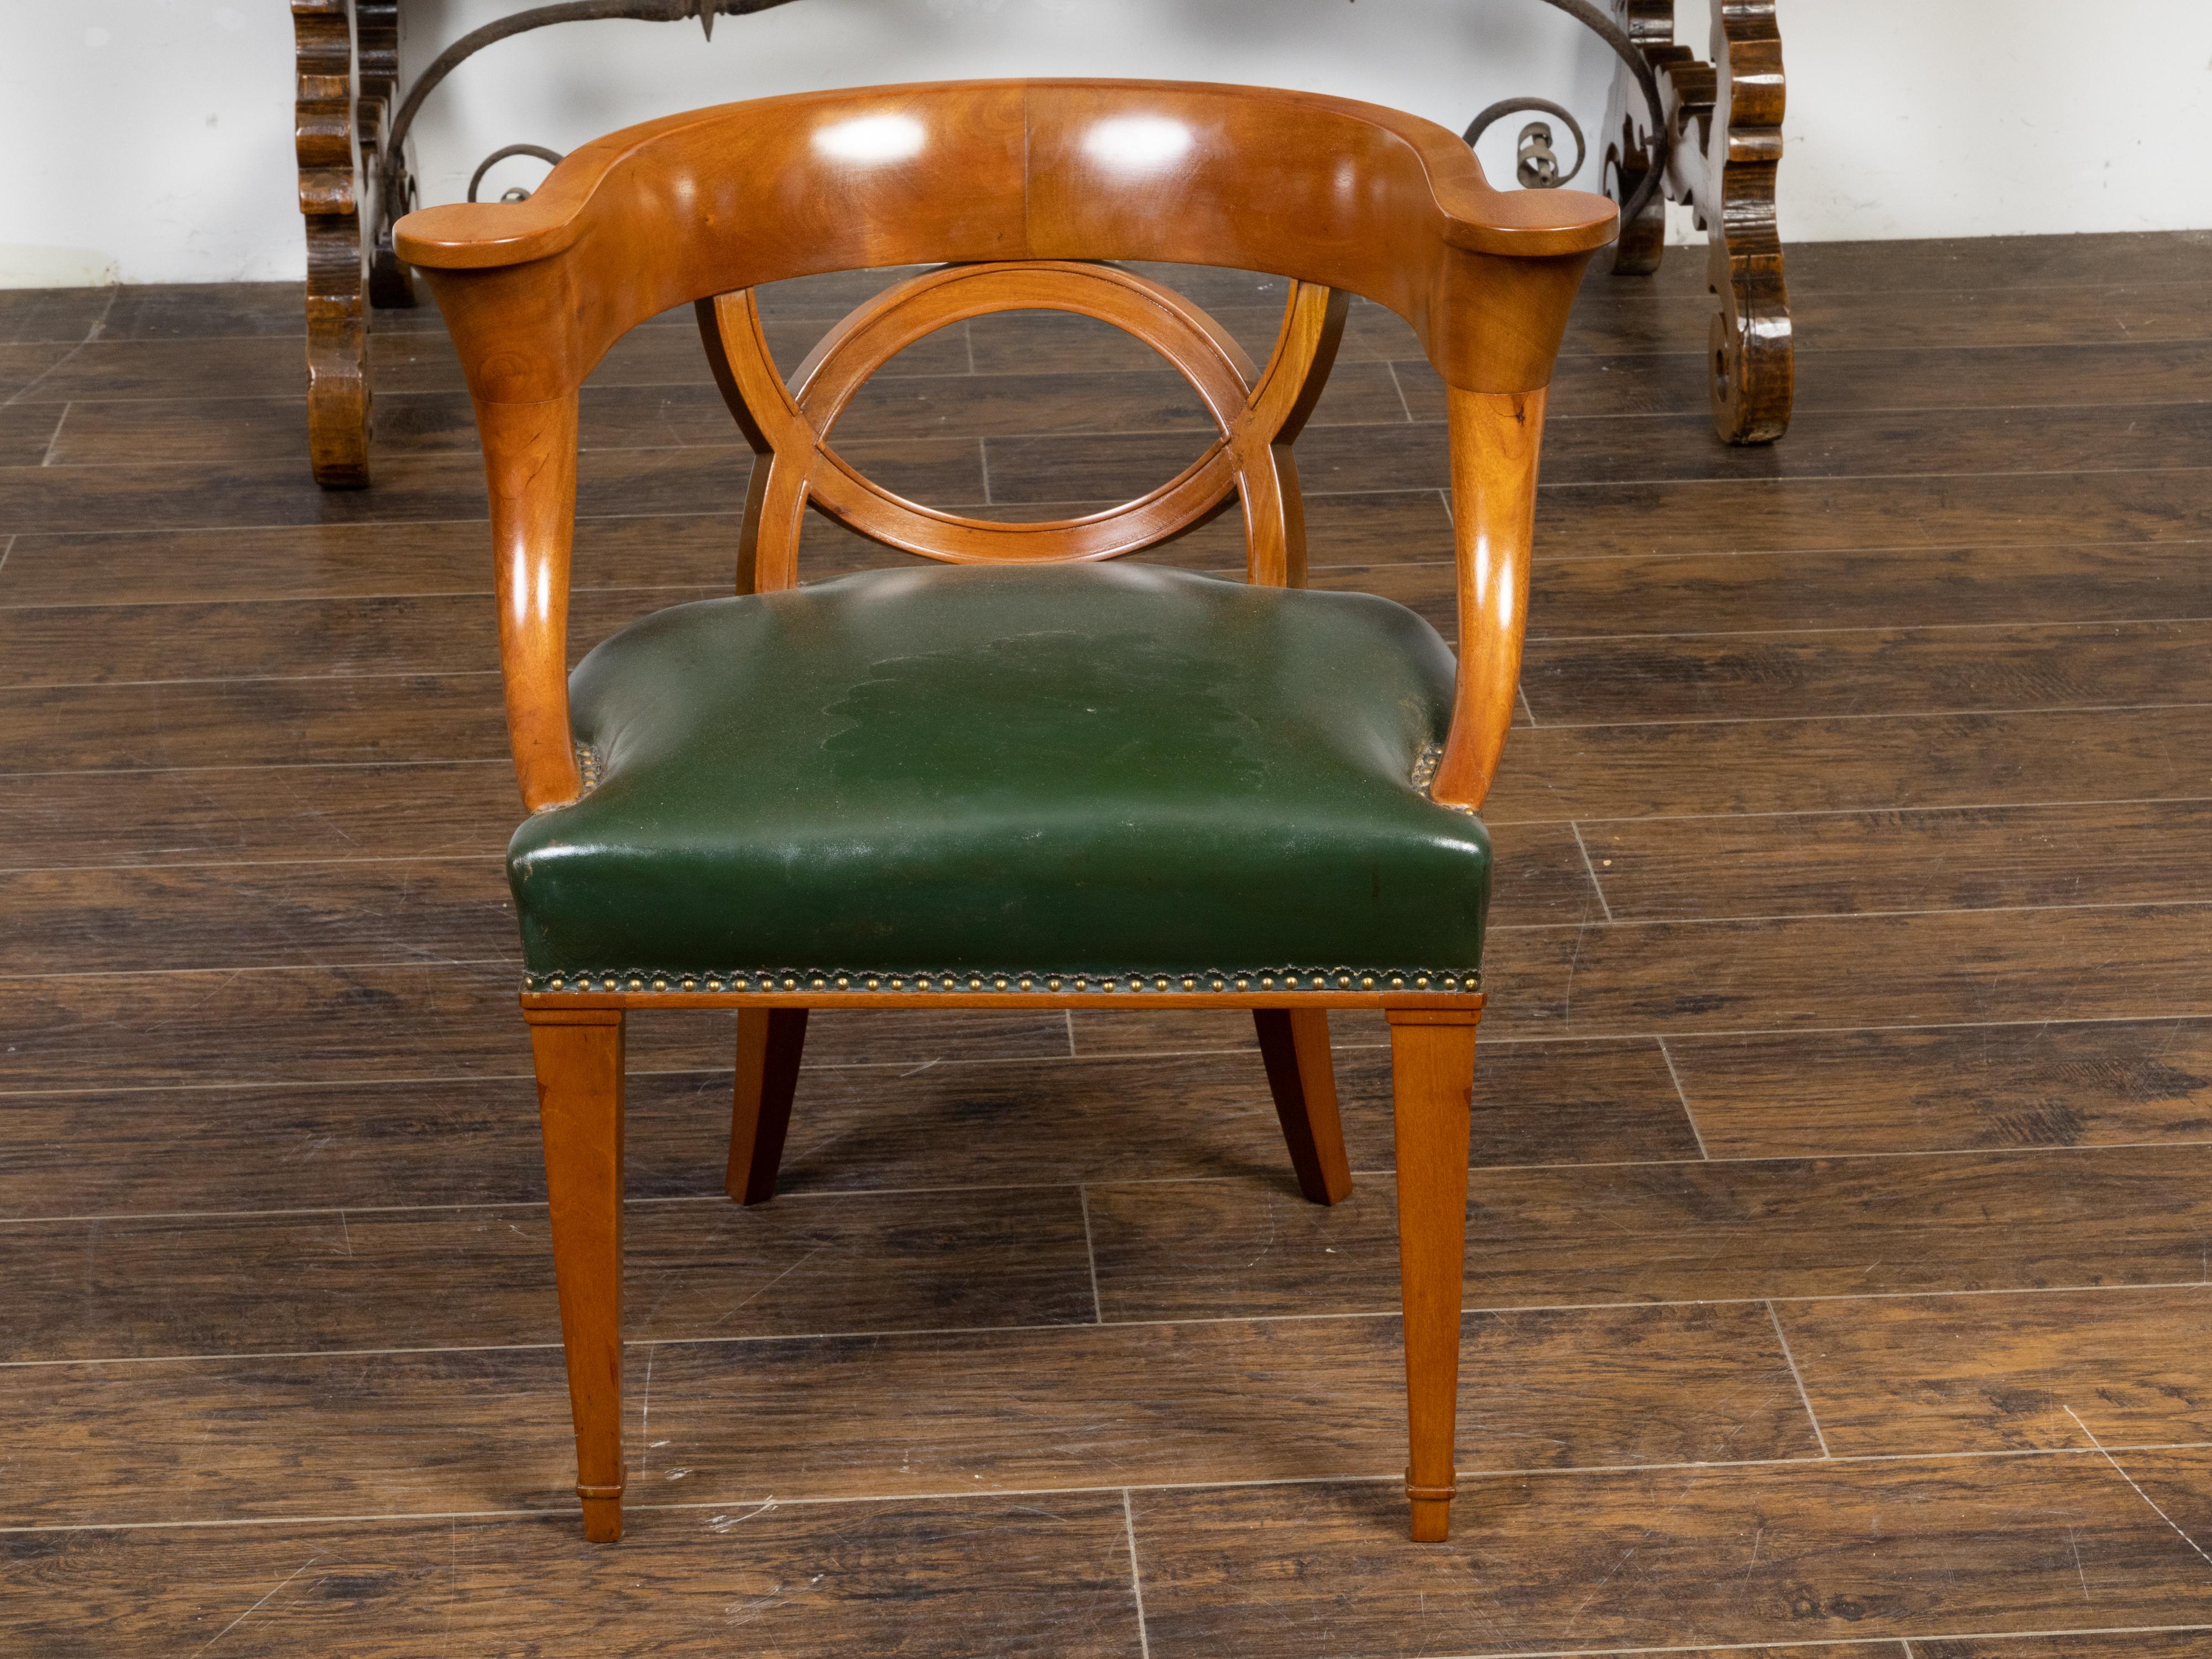 An Austrian Biedermeier period wooden armchair from the 19th century, with unusual horseshoe back, out-curving arms, intertwined semi-circular motifs, turned and saber legs and green leather upholstery. Created in Austria during the 19th century,